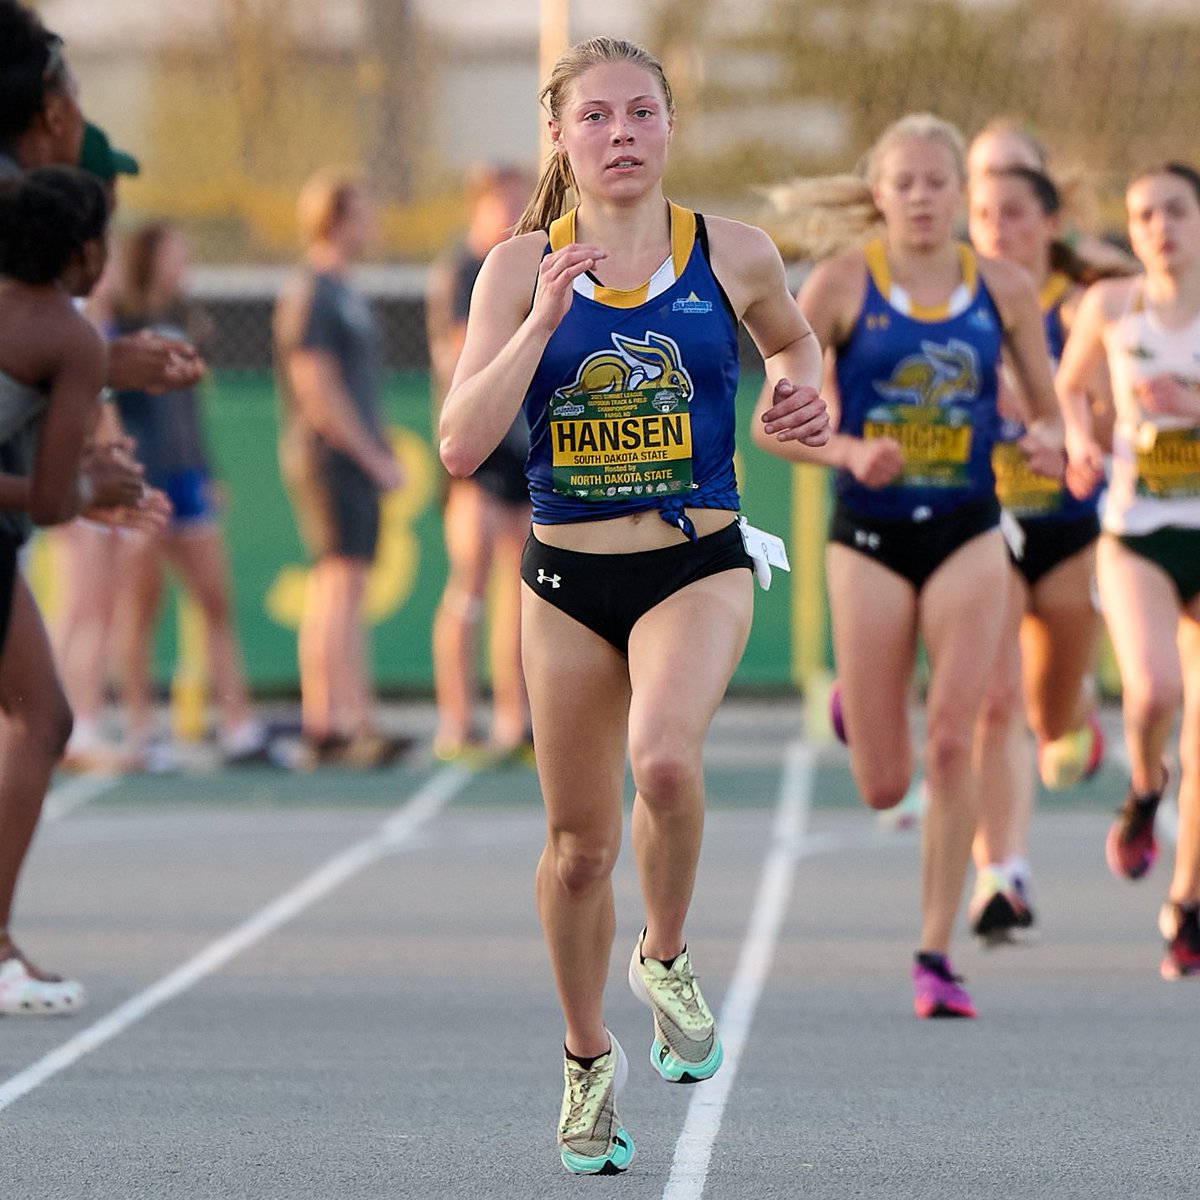 Leah Hisken runs 35:36.54 in the 10K to finish 33rd at the NCAA West Prelims. #GoJacks 🐰